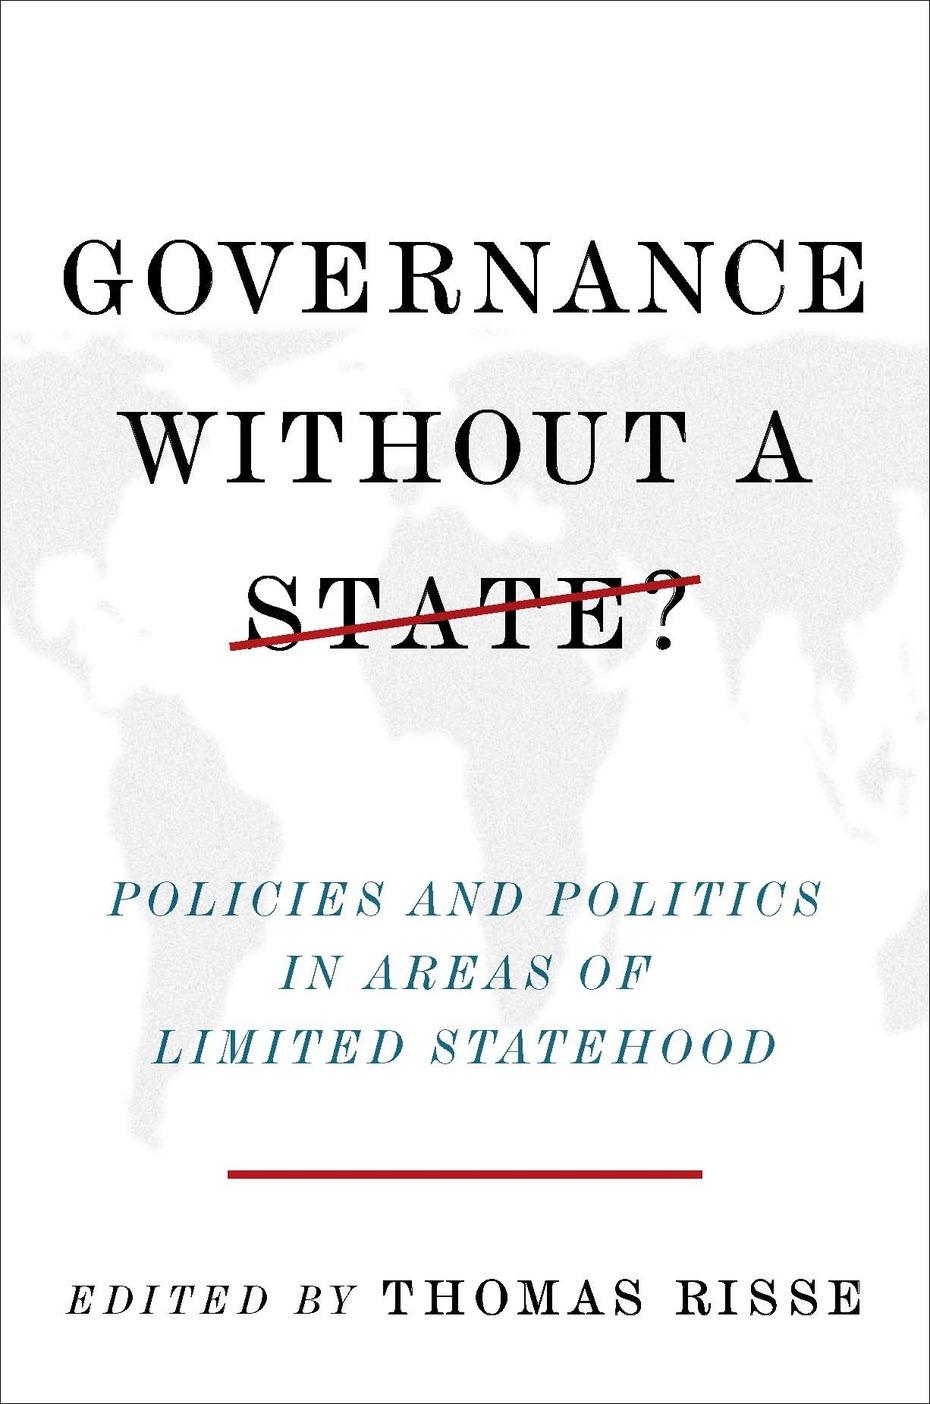 Governance without a state? Policies and Politics in Areas of Limited Statehood